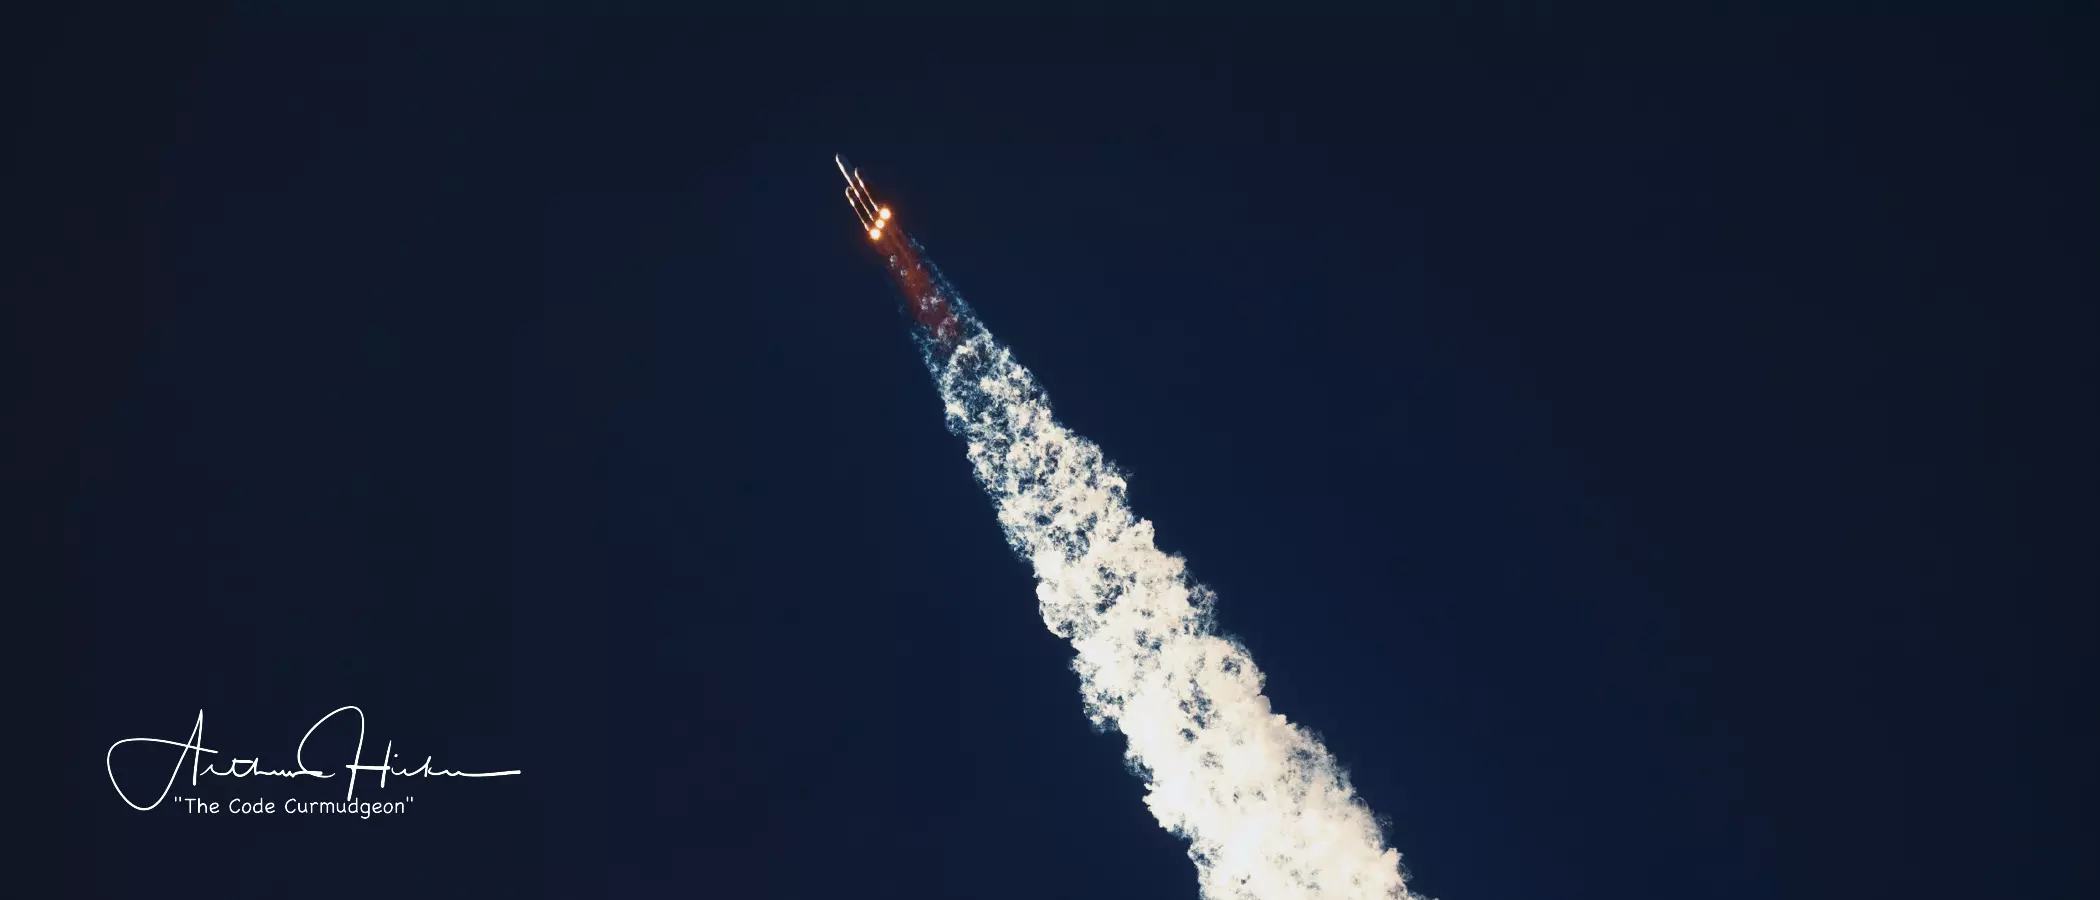 Cloud applications launch faster. Can test automation achieve escape velocity too?